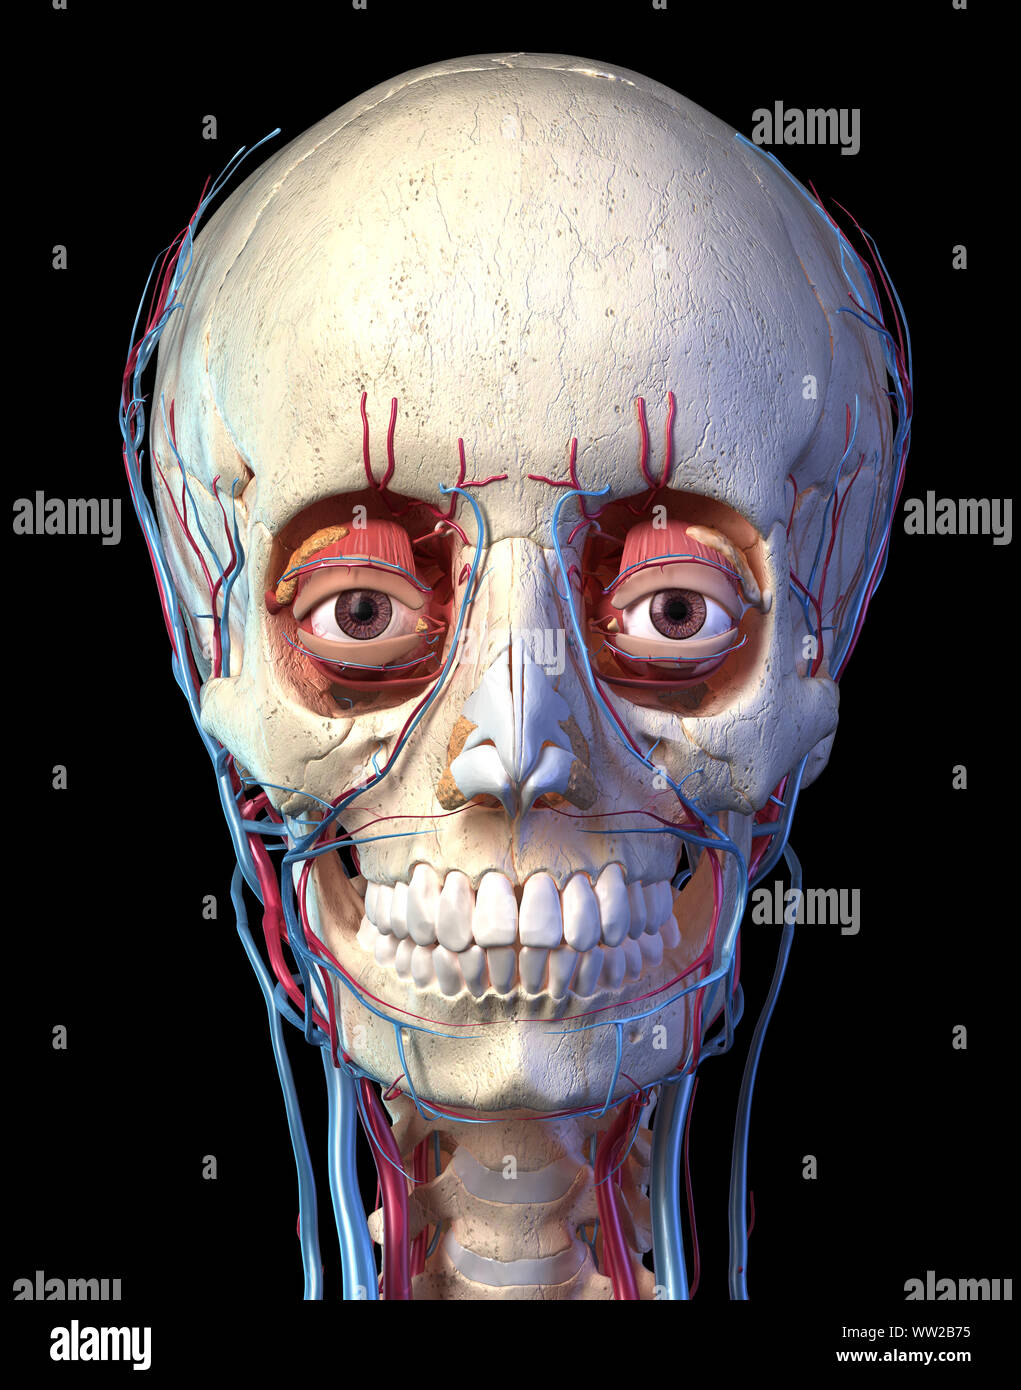 Human anatomy, Vascular system of the head viewed from the front. Computer 3d rendering artwork. On black background. Stock Photo